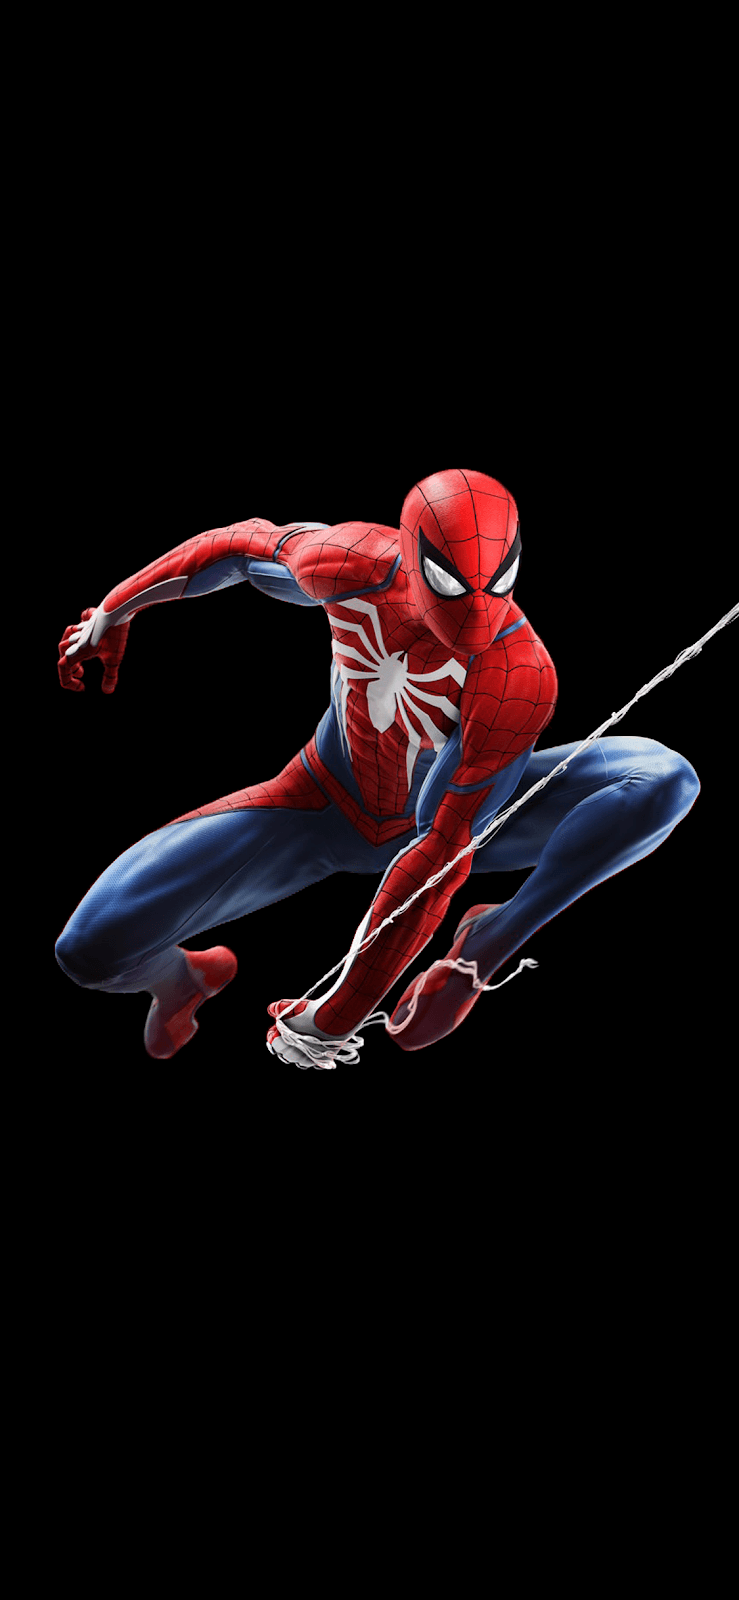 Spider Man Iphone Wallpapers 4k Hd Spider Man Iphone Backgrounds On Wallpaperbat